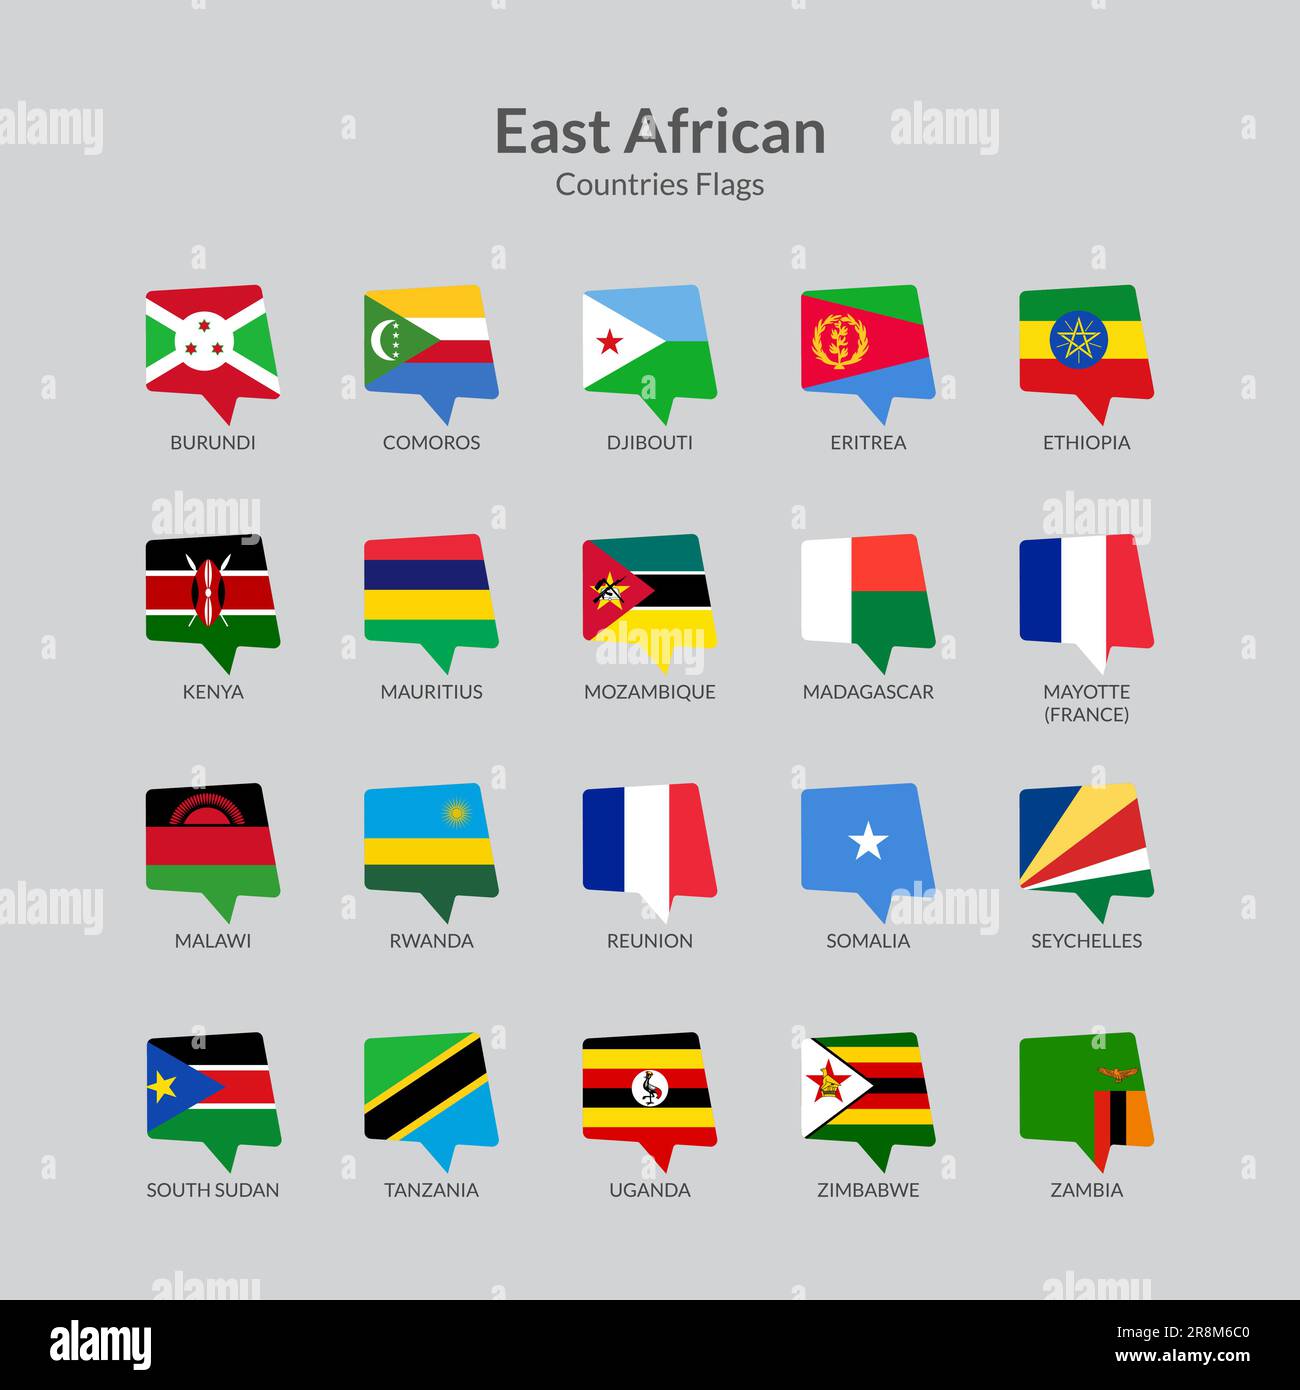 East African countries flag icons collection Stock Vector